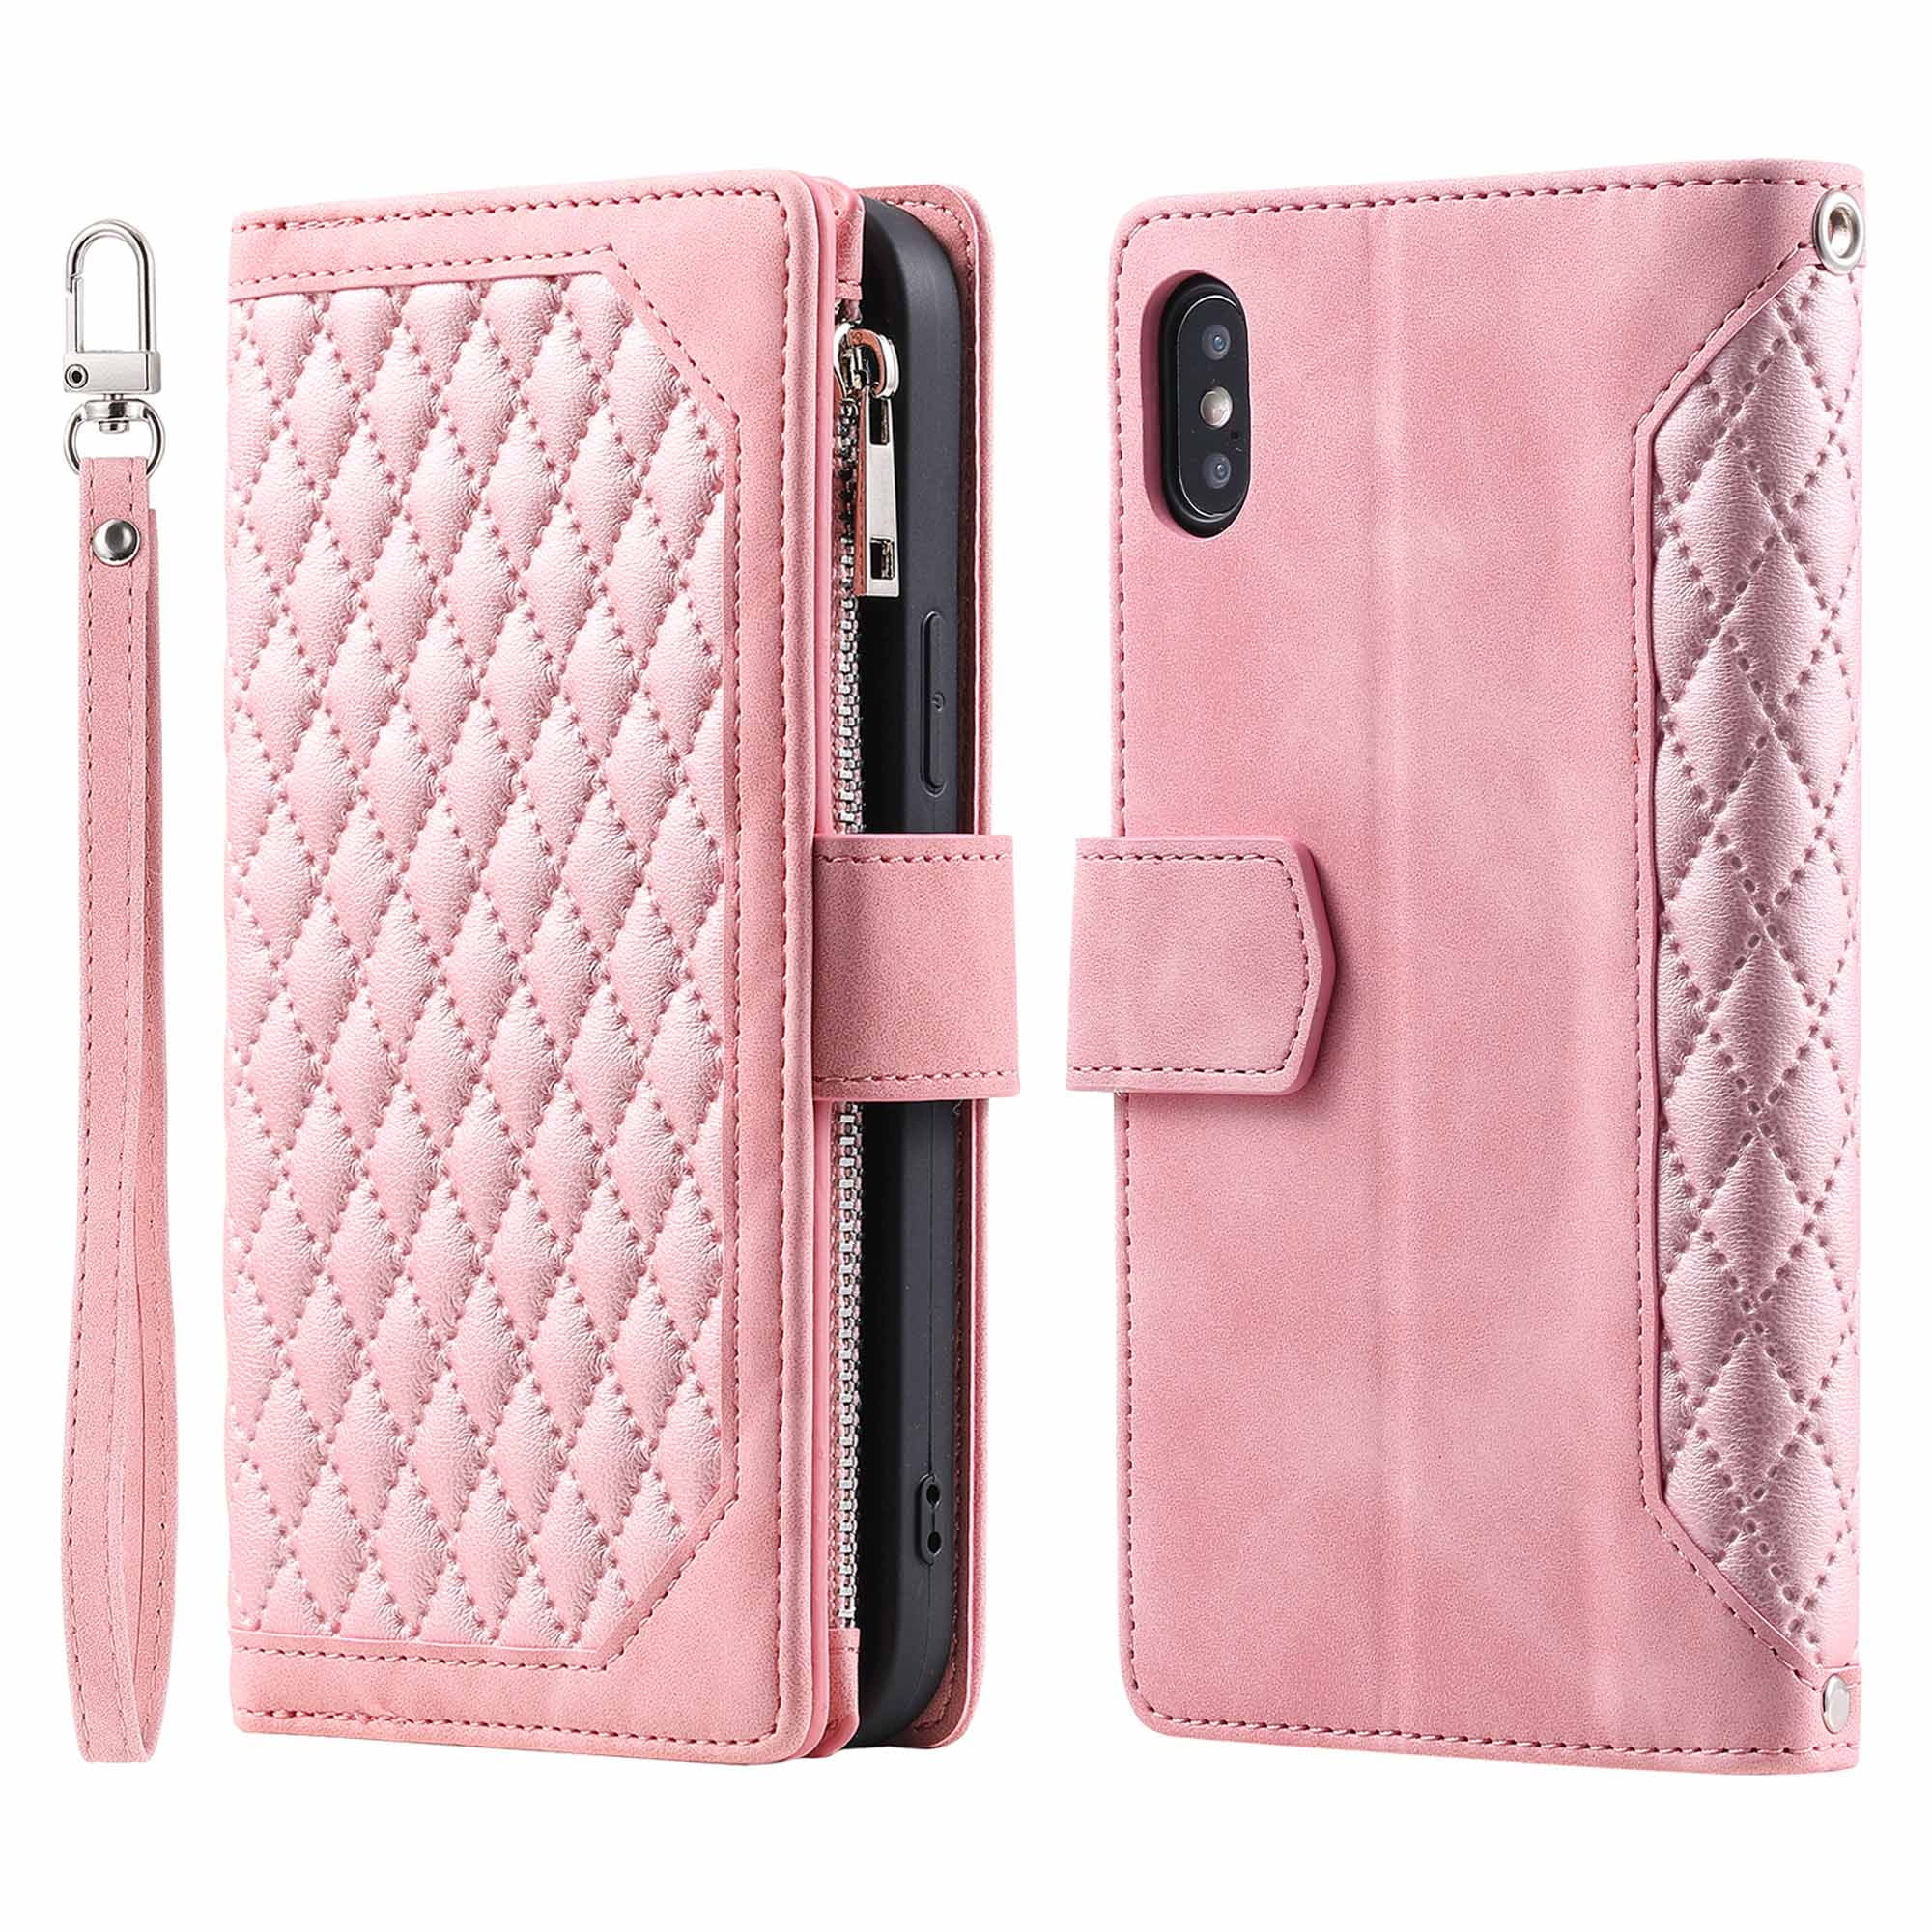 Dteck Luxury Wallet Case for iPhone XS/X,Crossbody Phone Case with